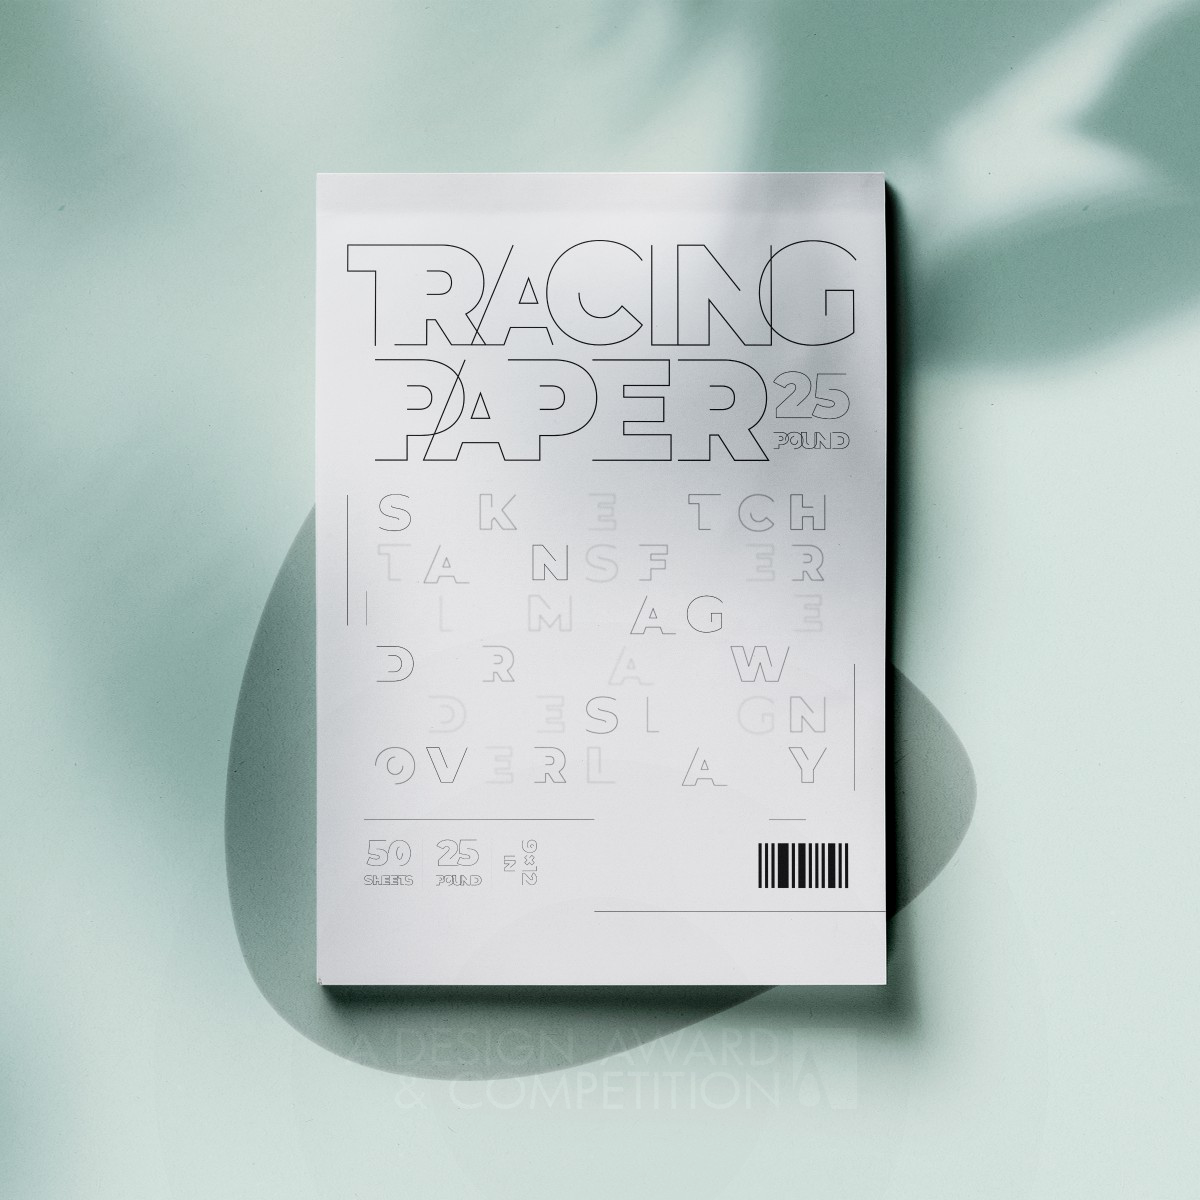 Tracing Package Typography by Yichen Wang Iron Graphics, Illustration and Visual Communication Design Award Winner 2024 